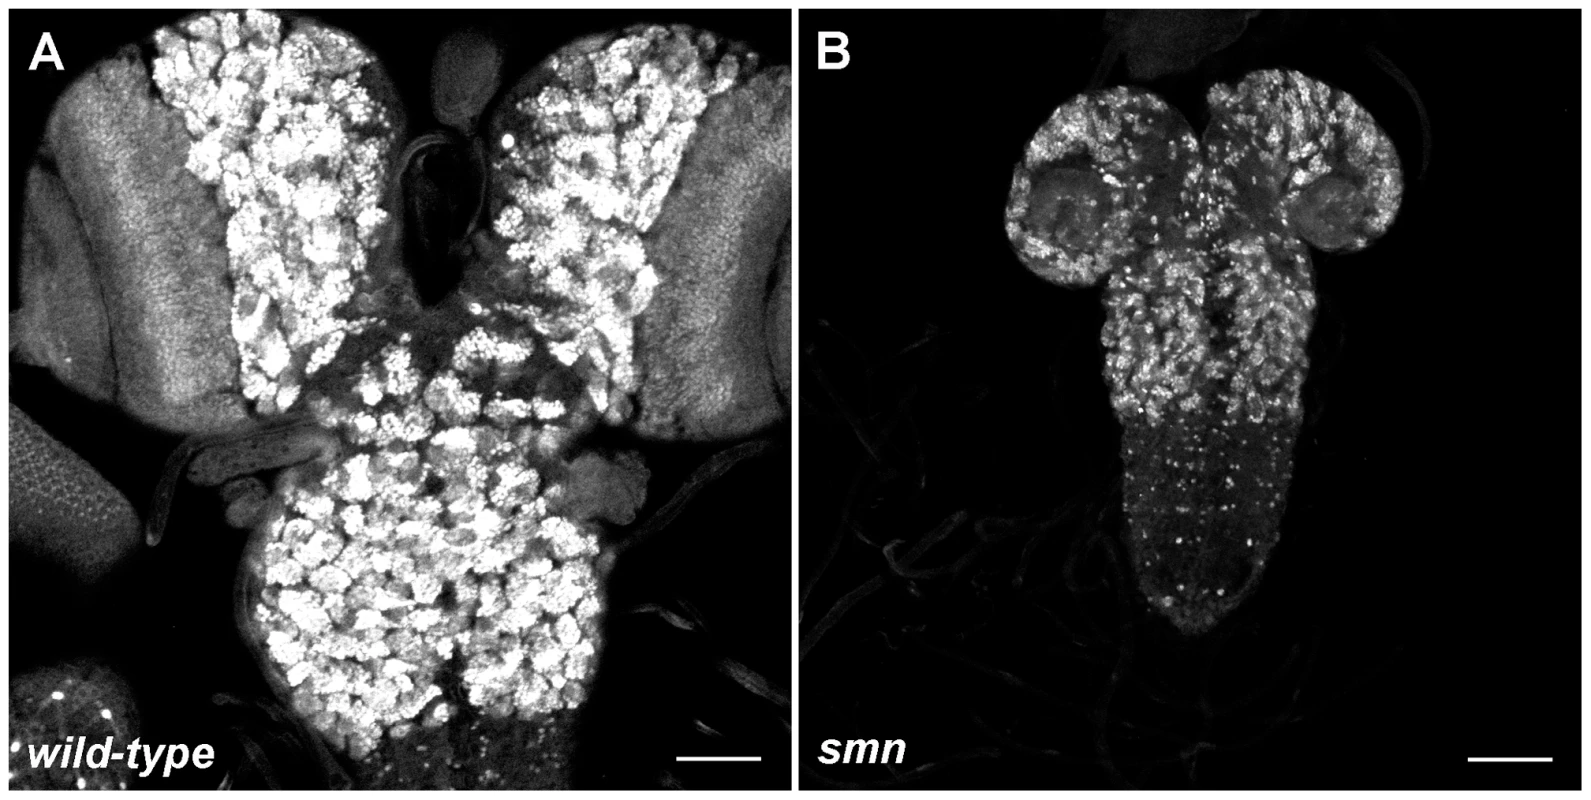 Growth defects in the SMN mutant CNS.